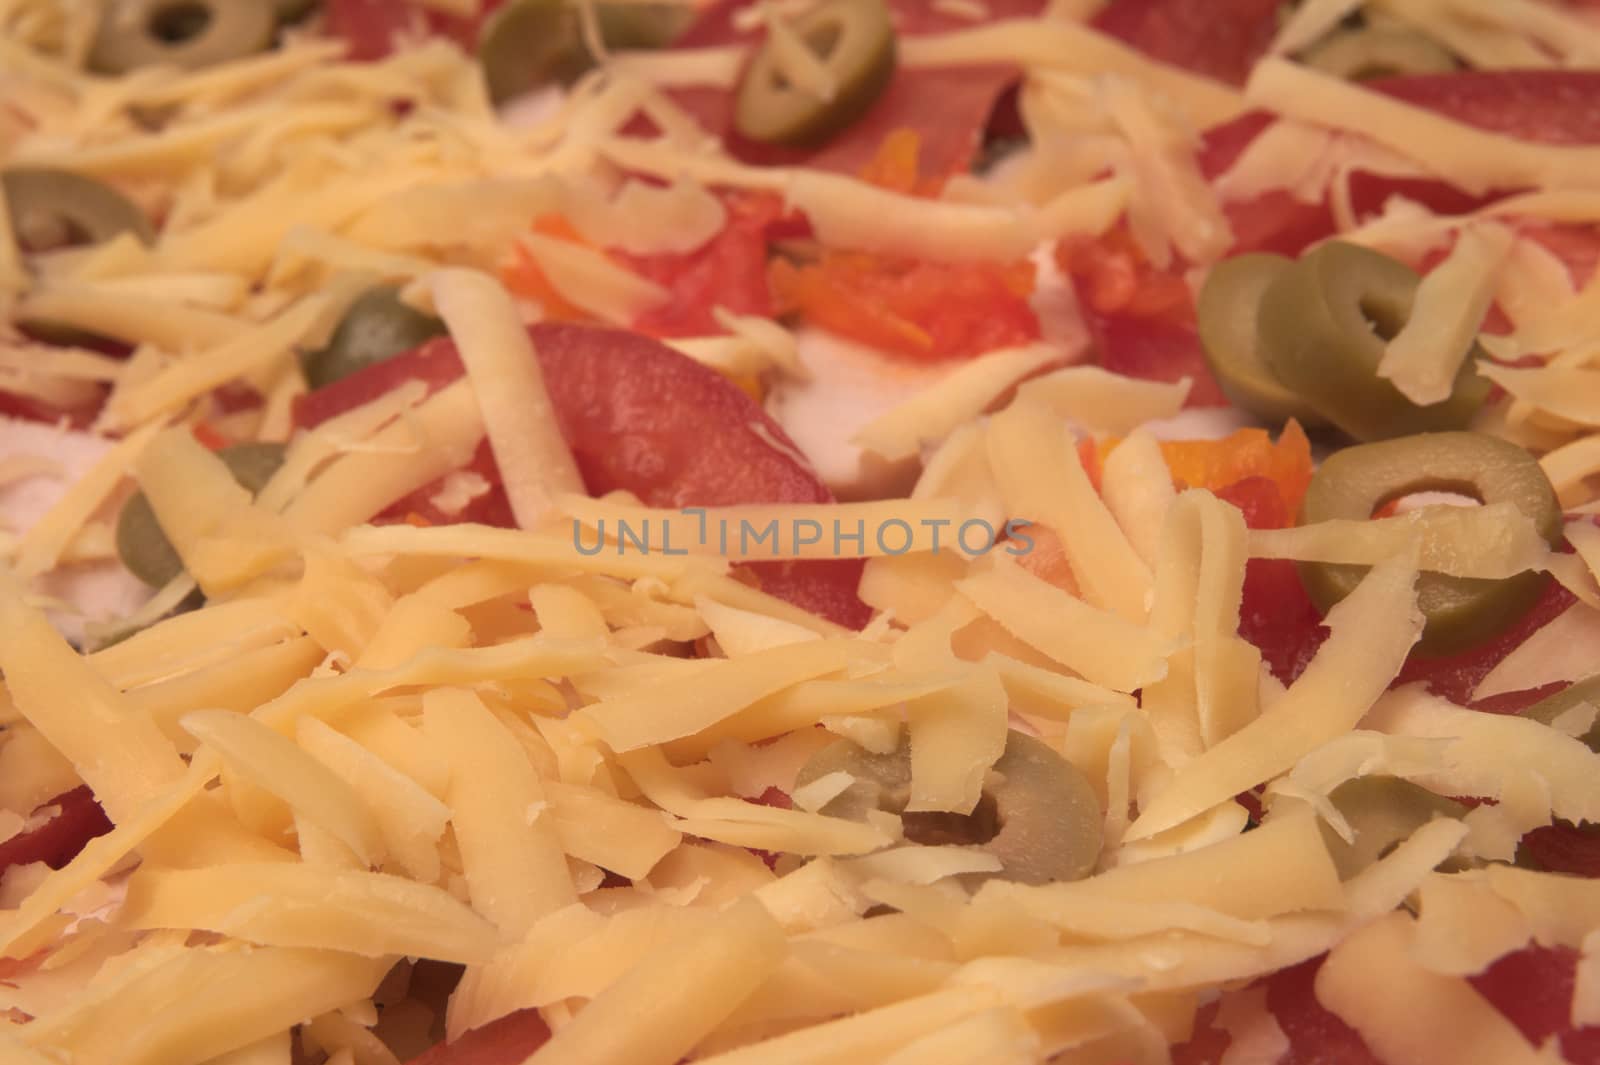 Backgroung made of white grated cheese, tomatoes,olives